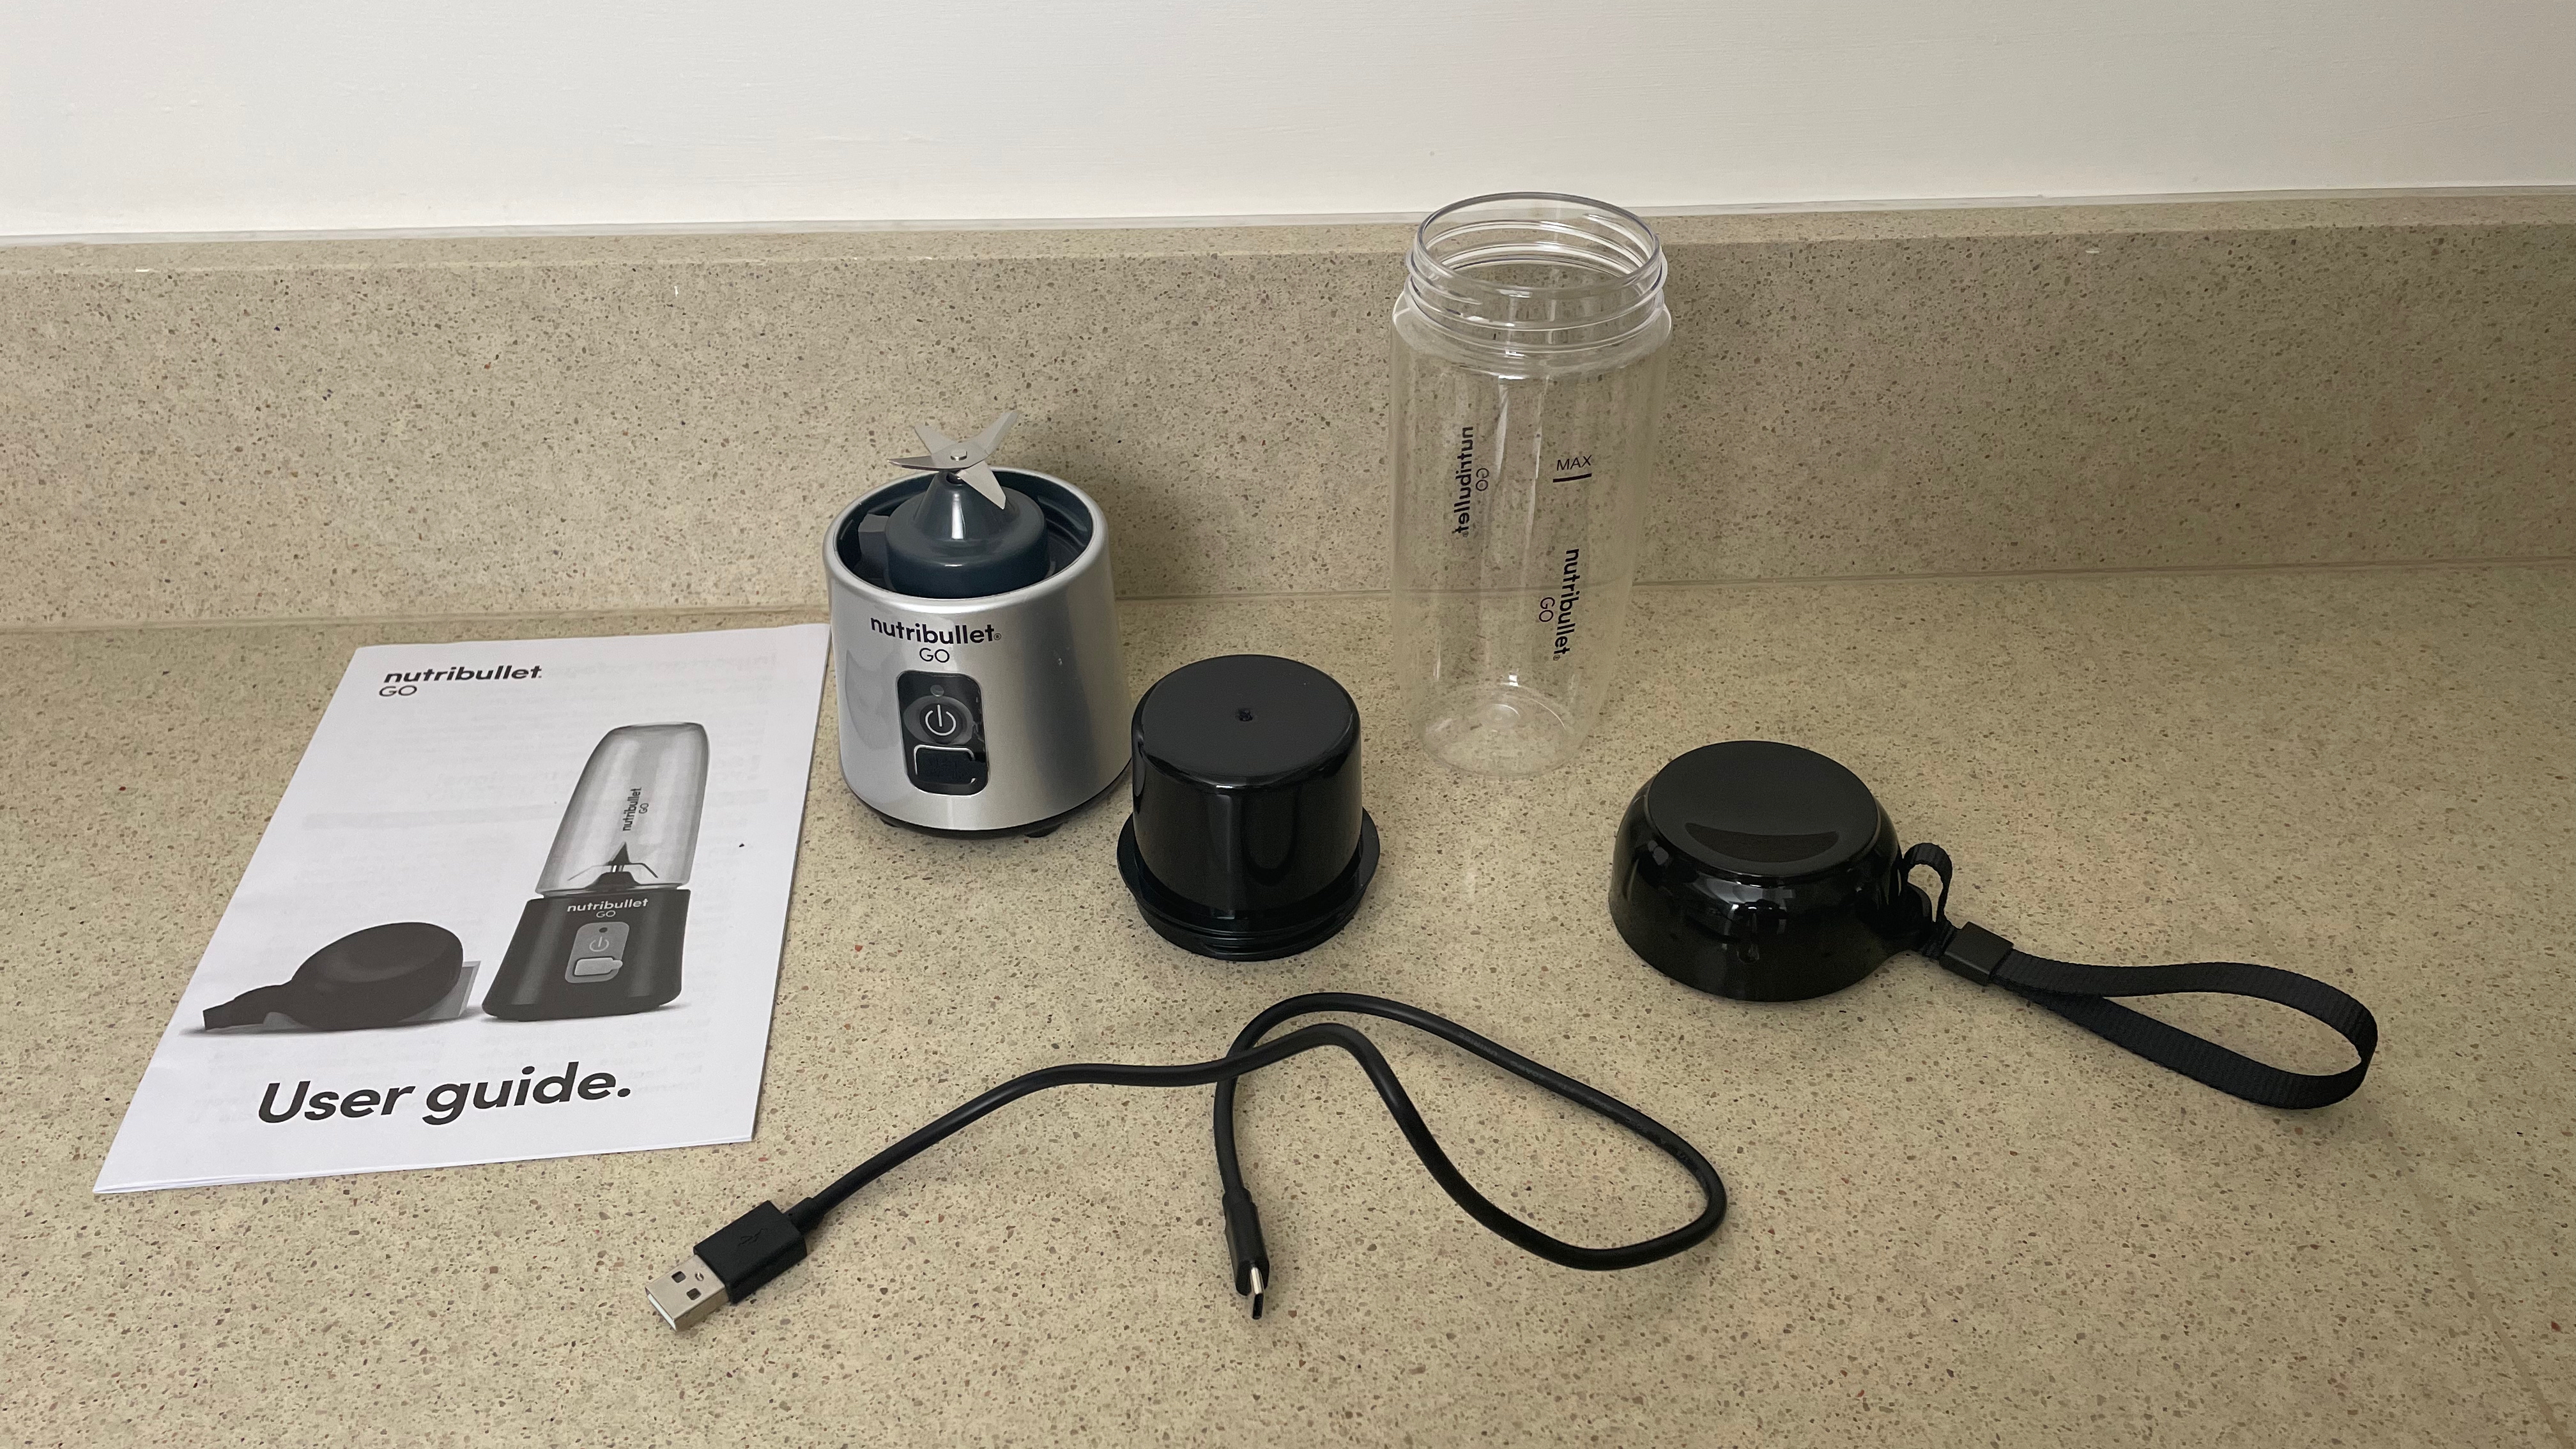 Nutribullet Go components and instruction manual on a counter